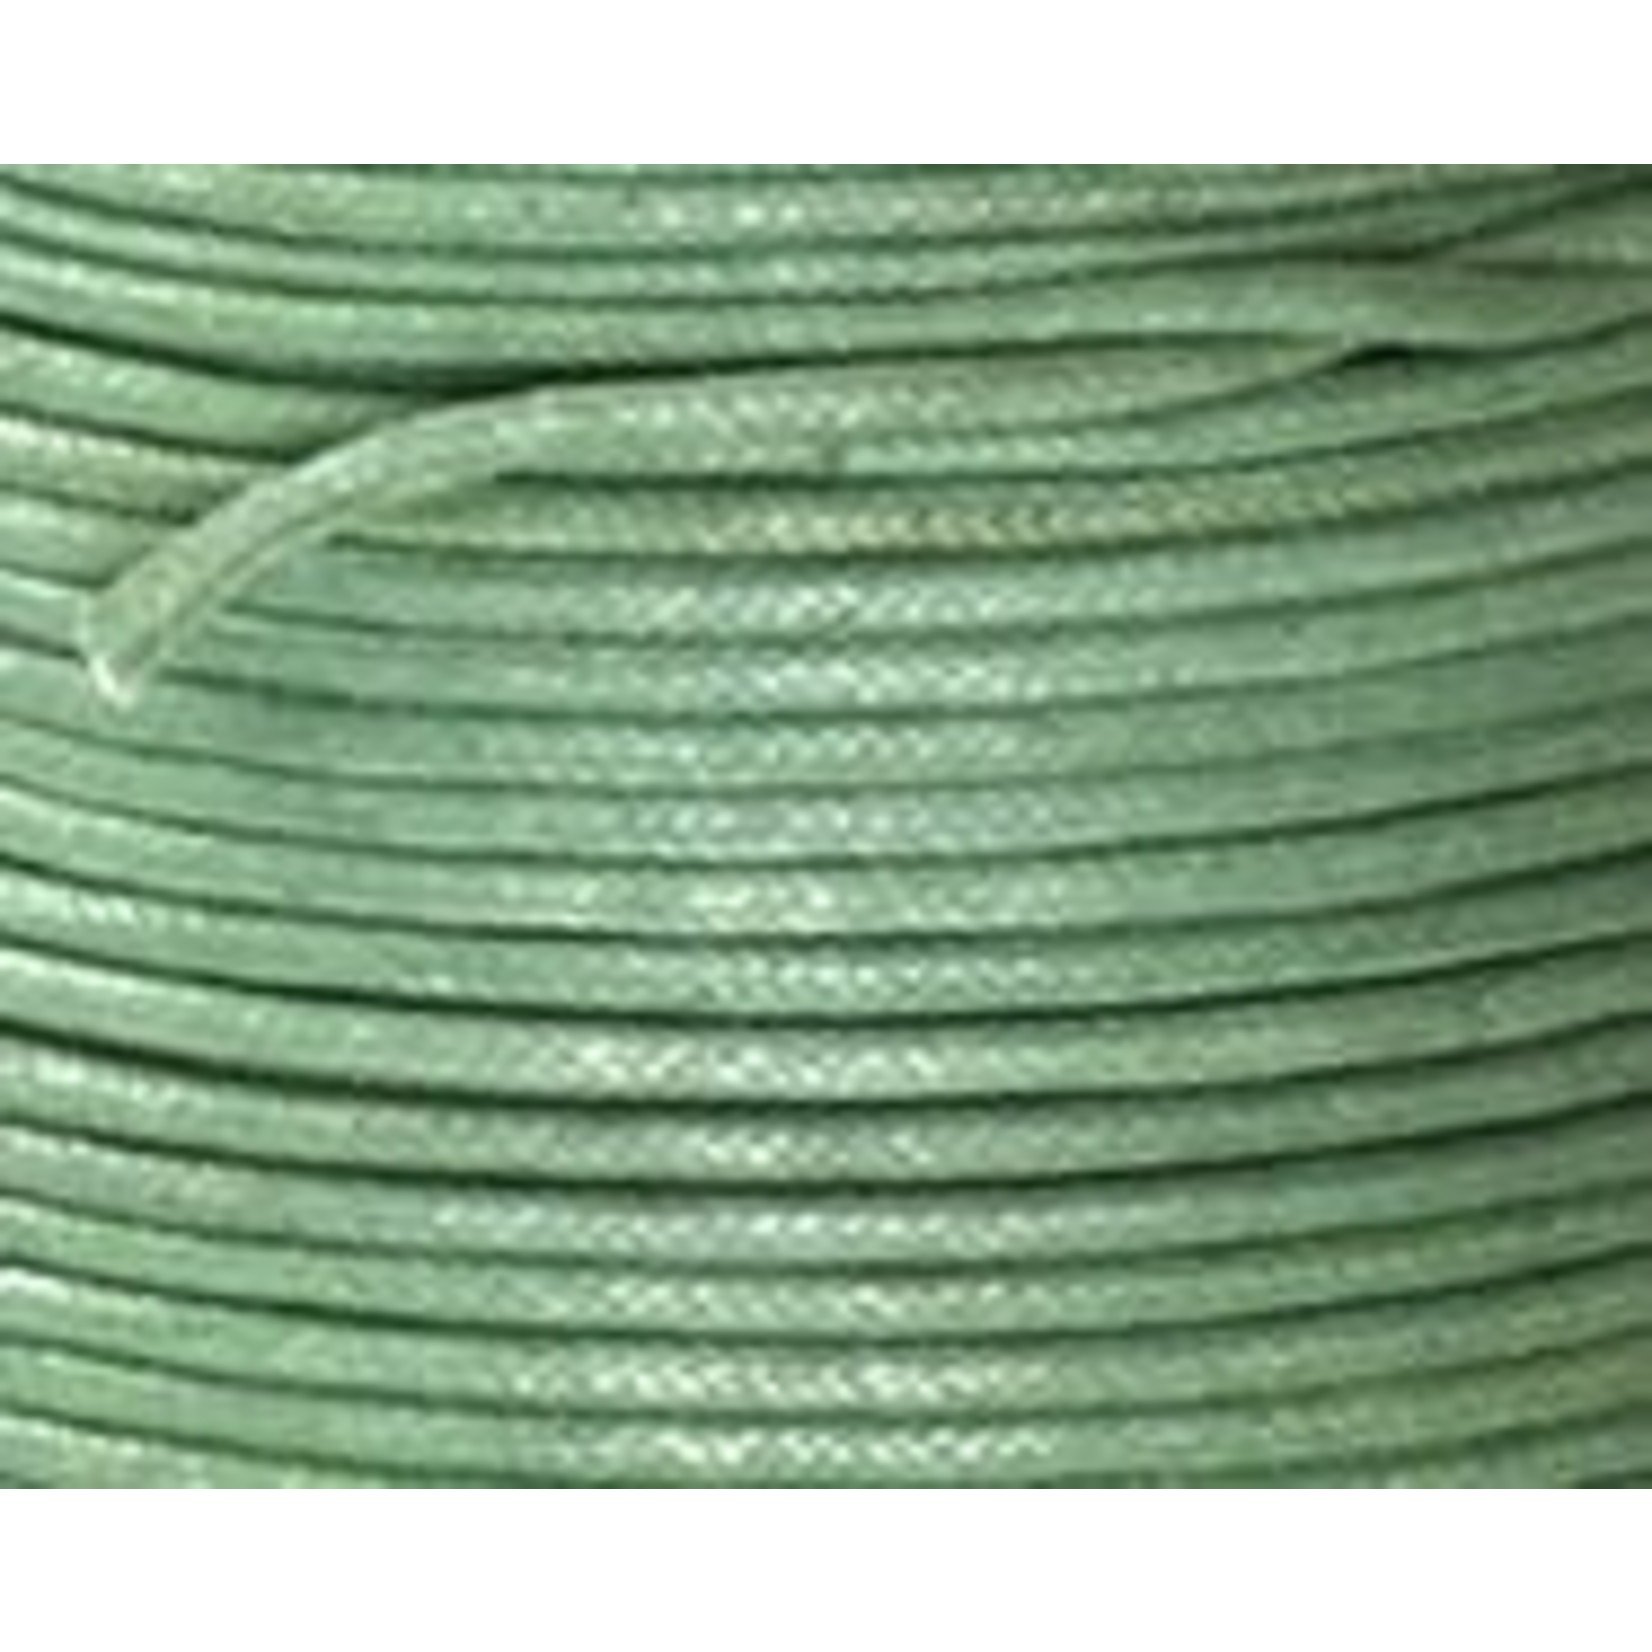 Mint Waxed Cotton Cord 1mm - 1 ft